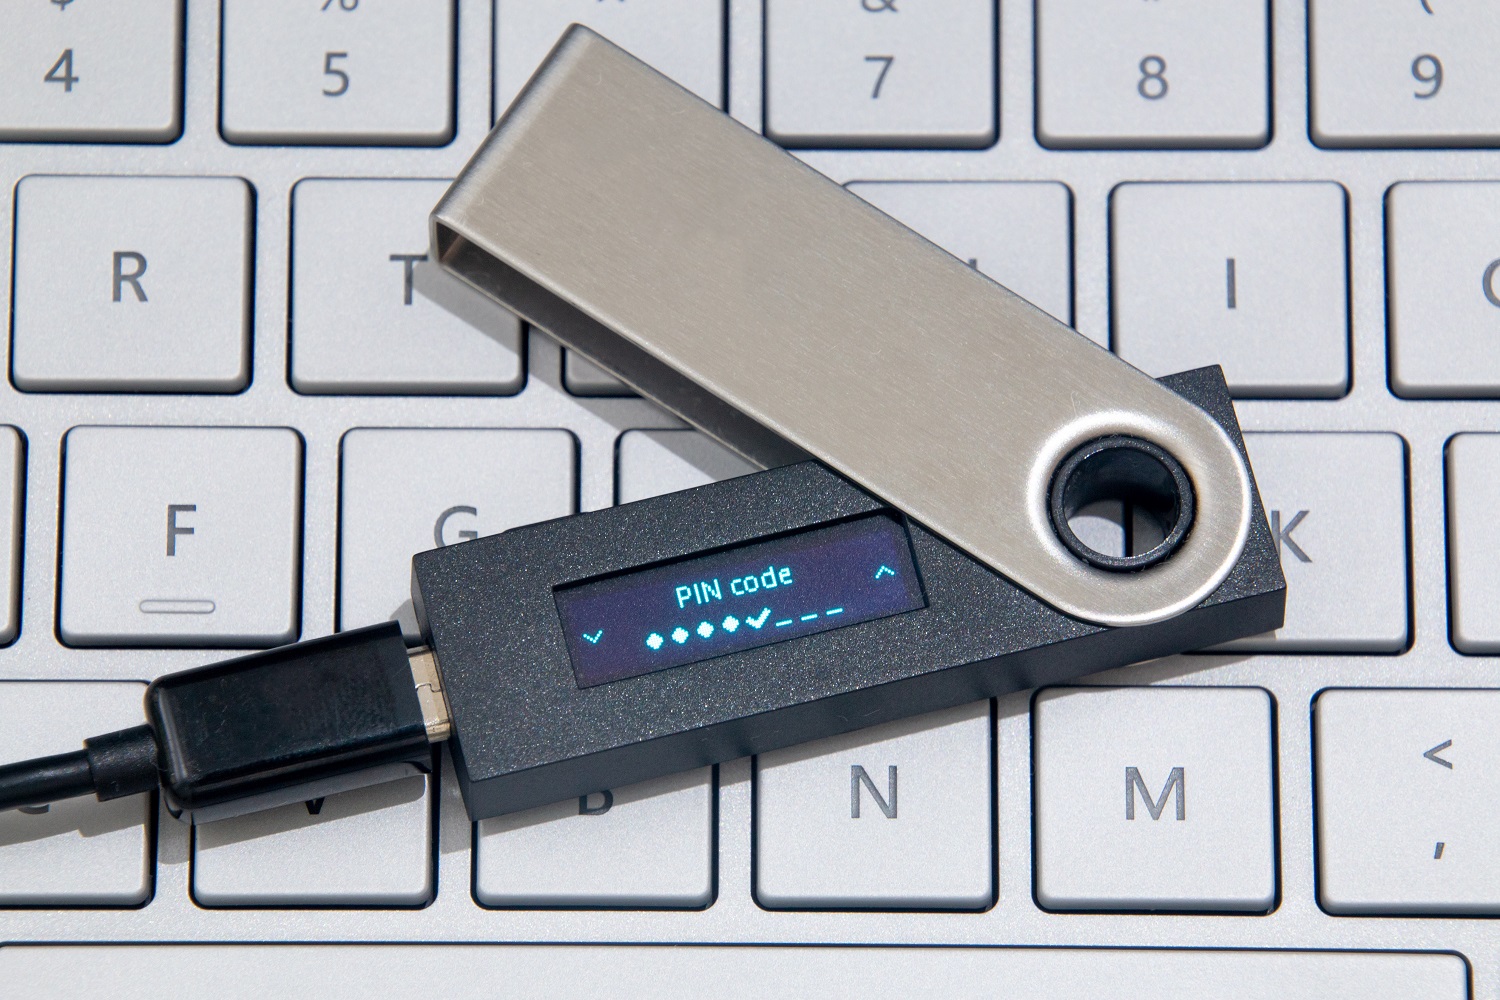 A crypto hardware wallet, plugged in to a cord via a USB socket, rests on a laptop keyboard.